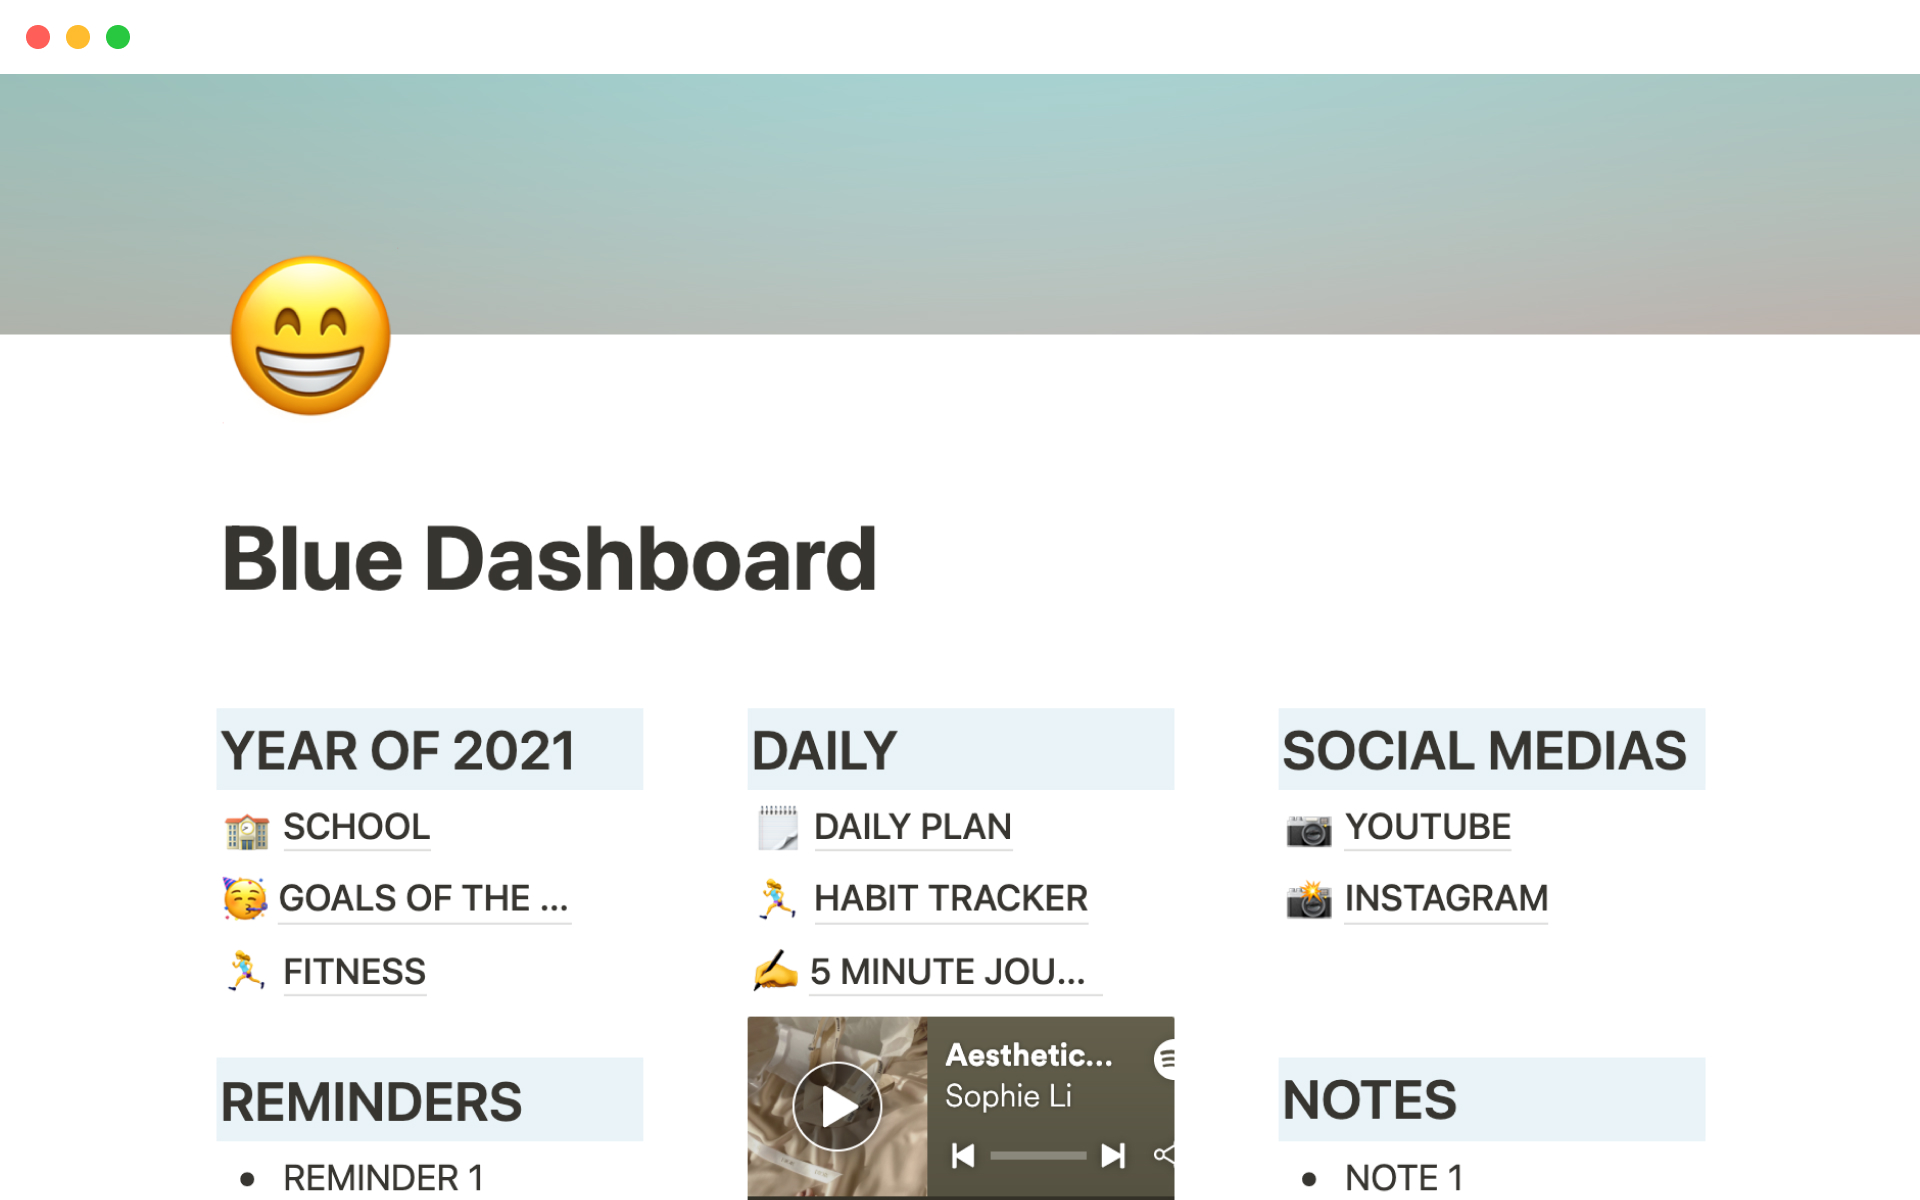 The desktop image for the Blue dashboard template